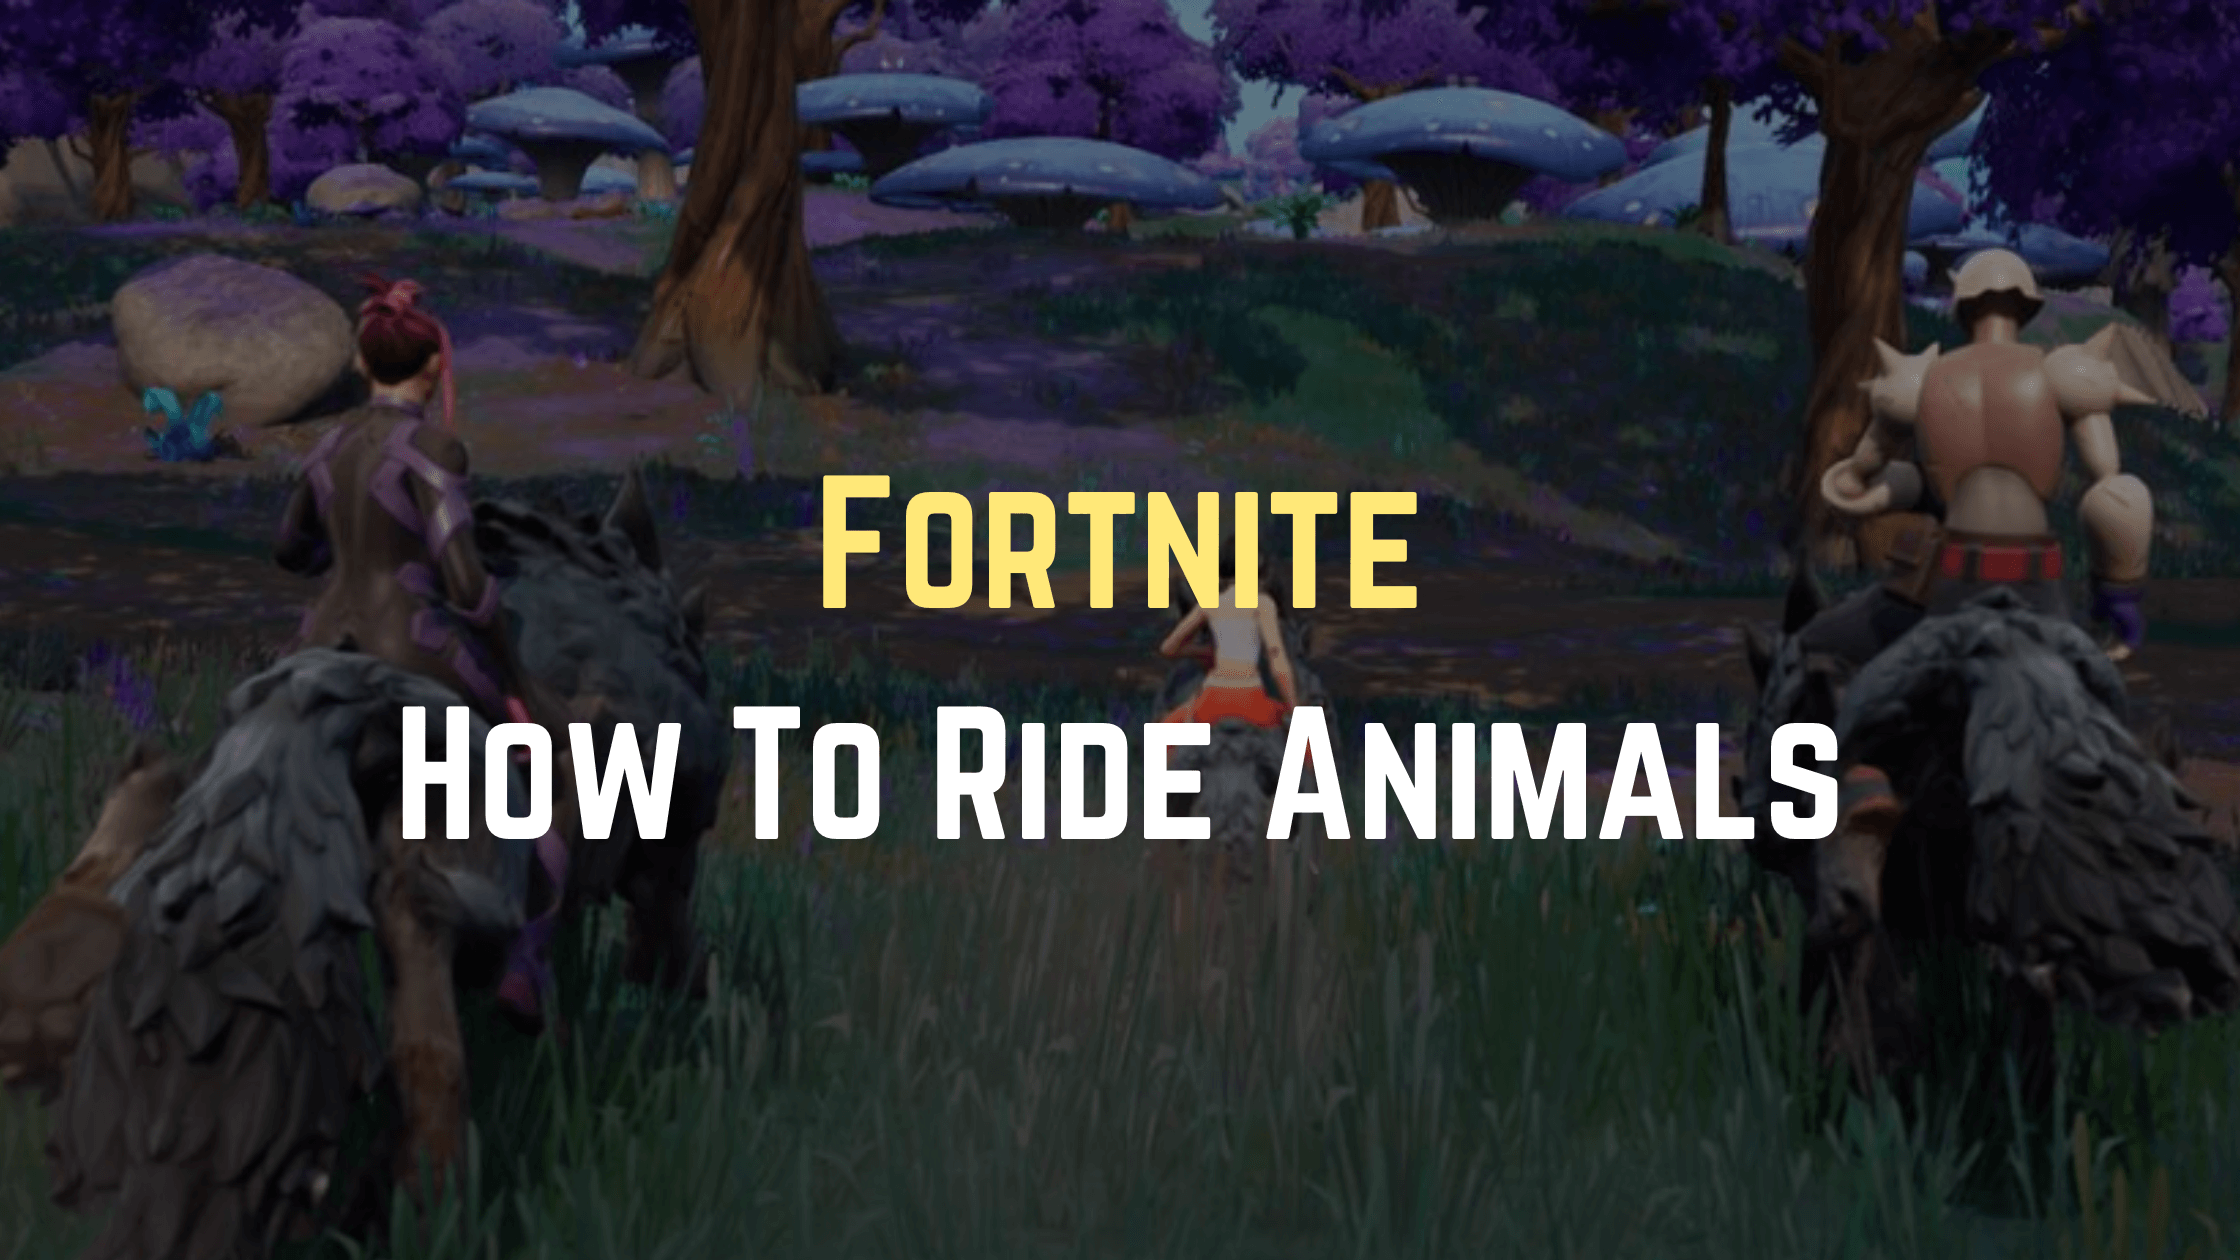 Fortnite how to ride animals